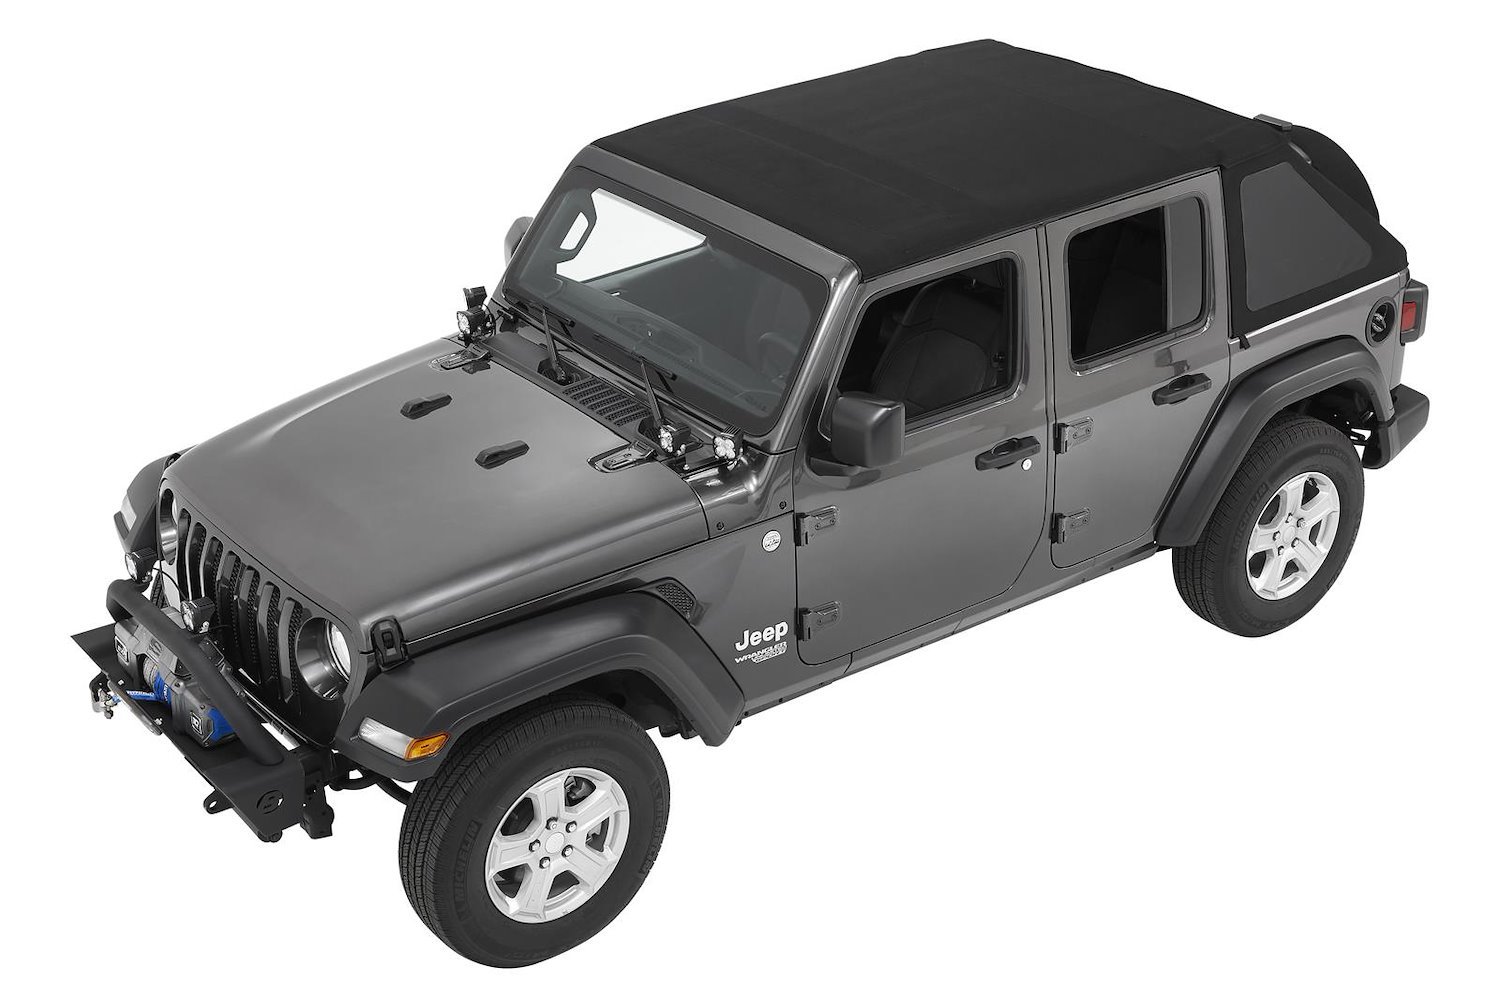 Bestop 56862-17: Trektop Slantback Soft Top | Fits Jeep Wrangler JL 2-Door  | Complete Fastback Style Soft Top | Black Twill Material | Tinted Side &  Rear Windows | Includes Mounting Hardware - JEGS